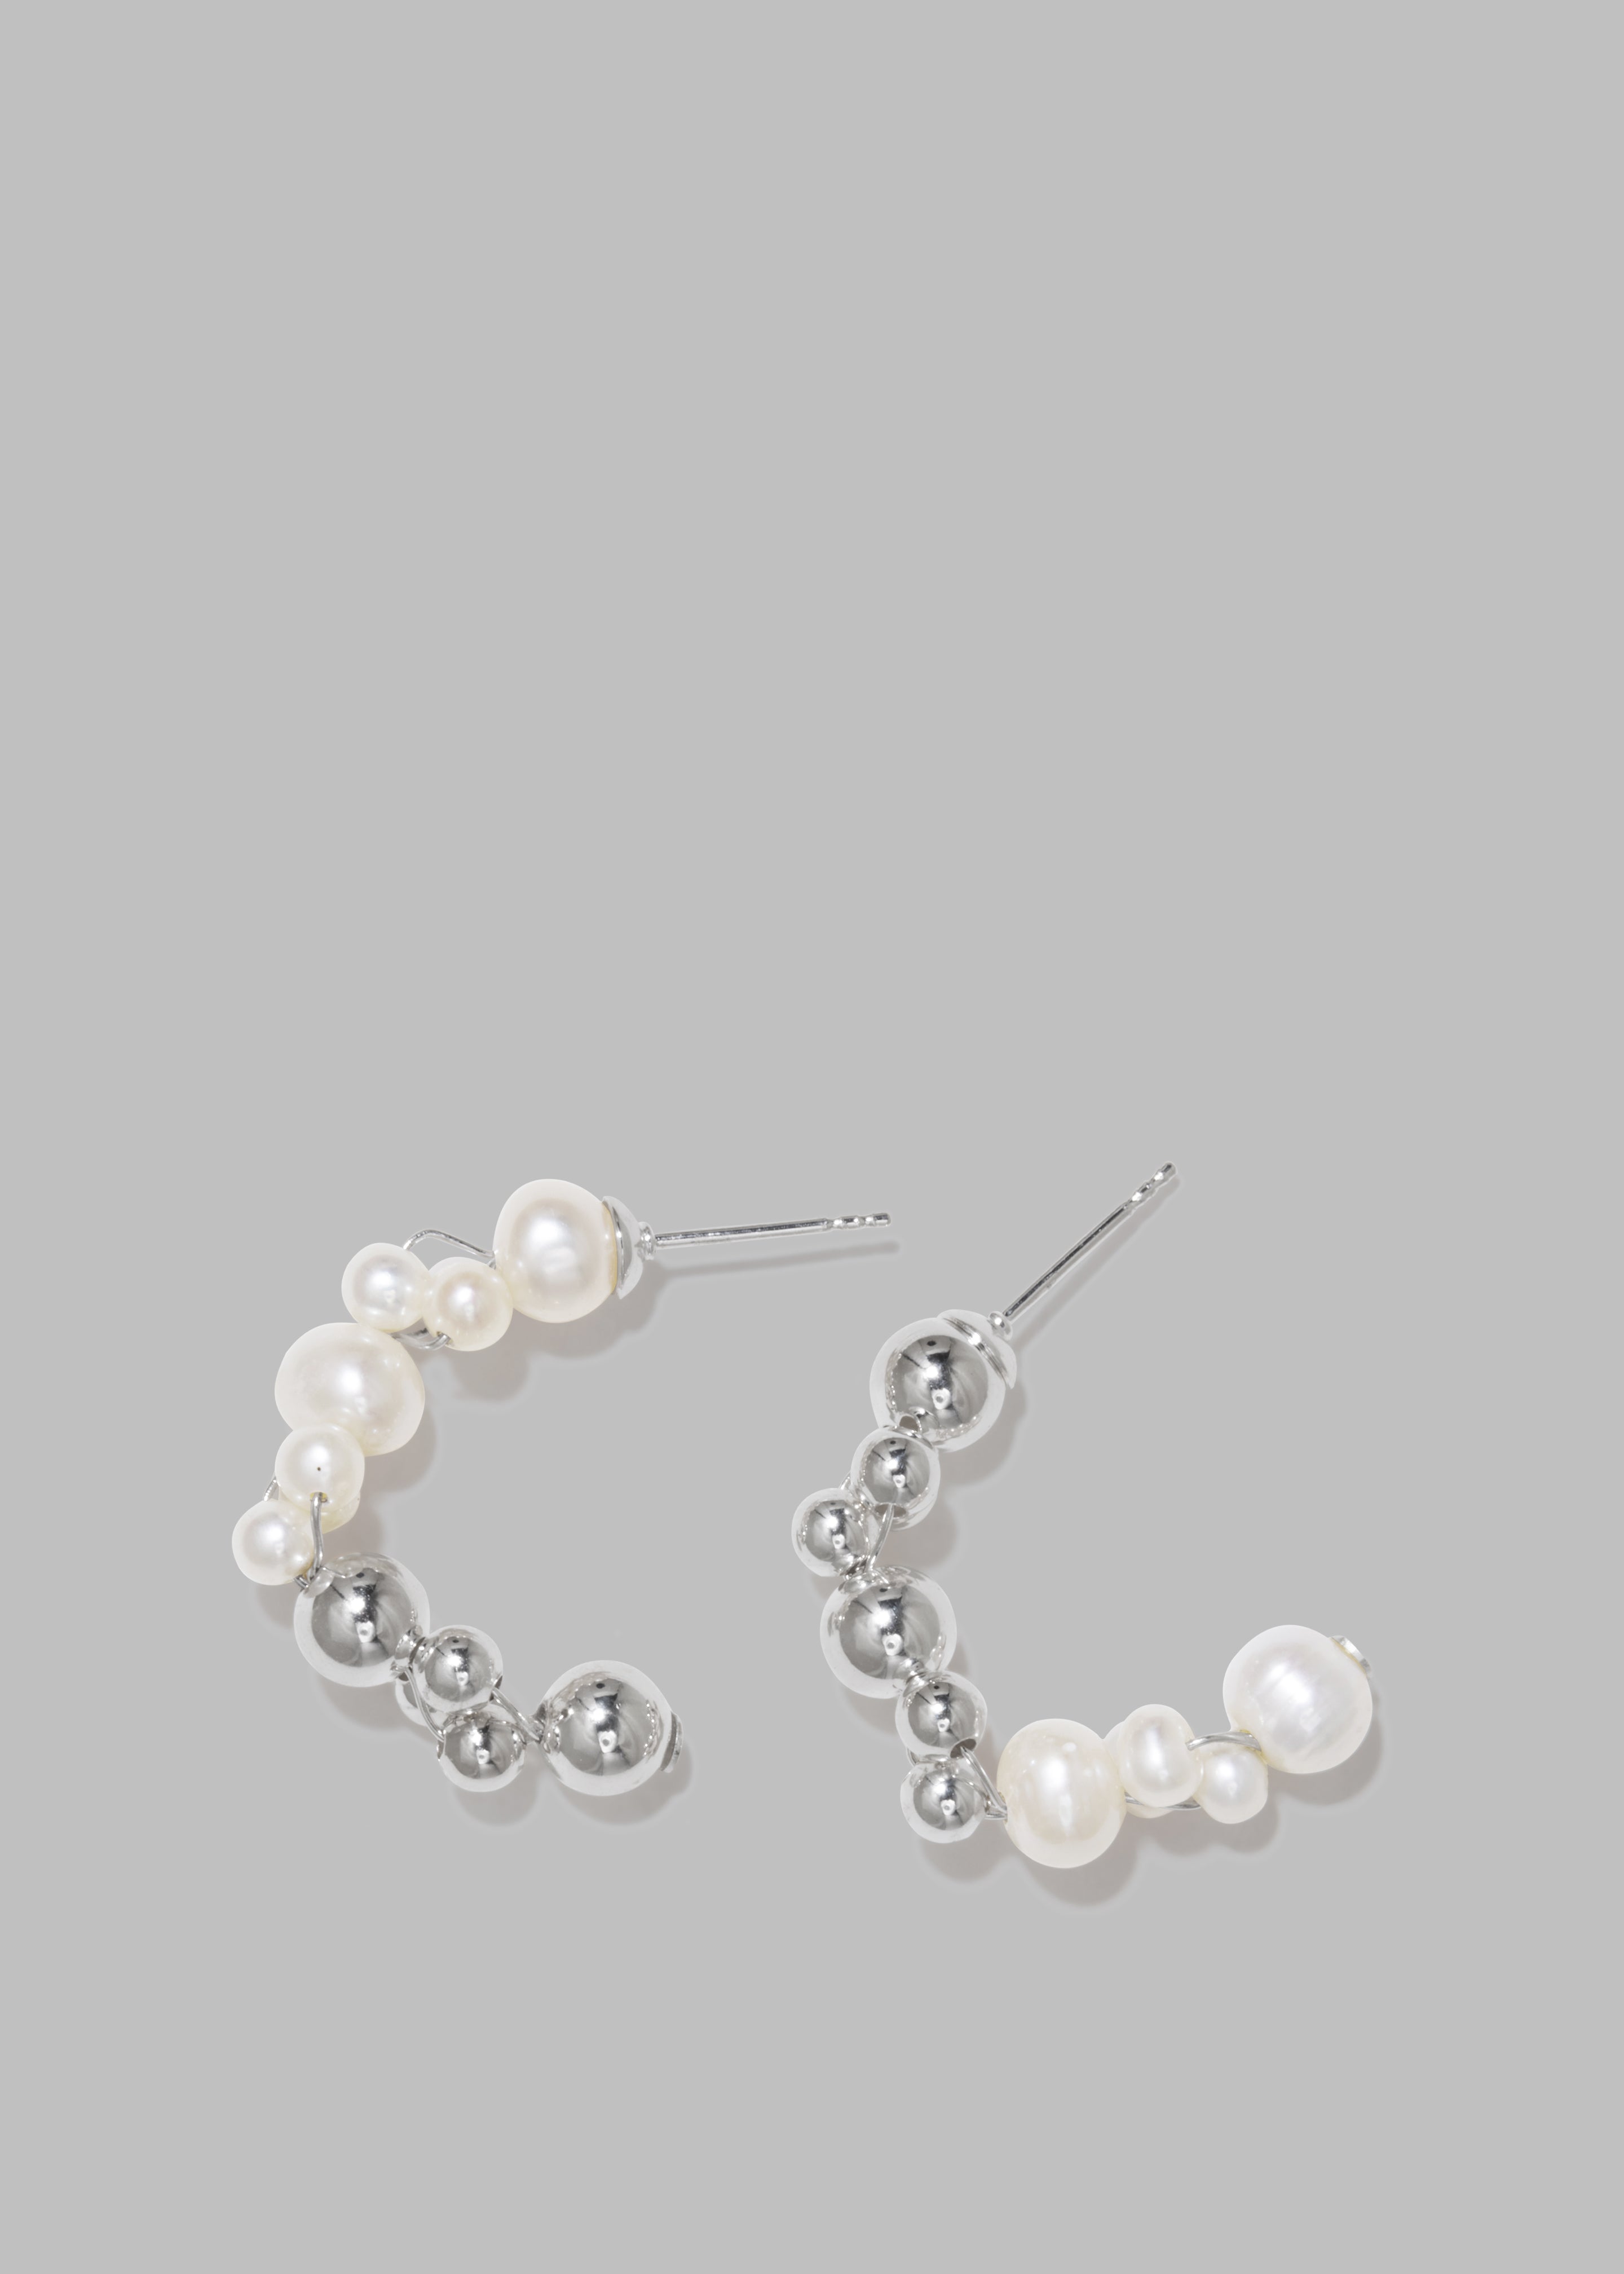 Completedworks Every Cloud Has A Silver Lining Earrings - Pearl/Sterling Silver - 3